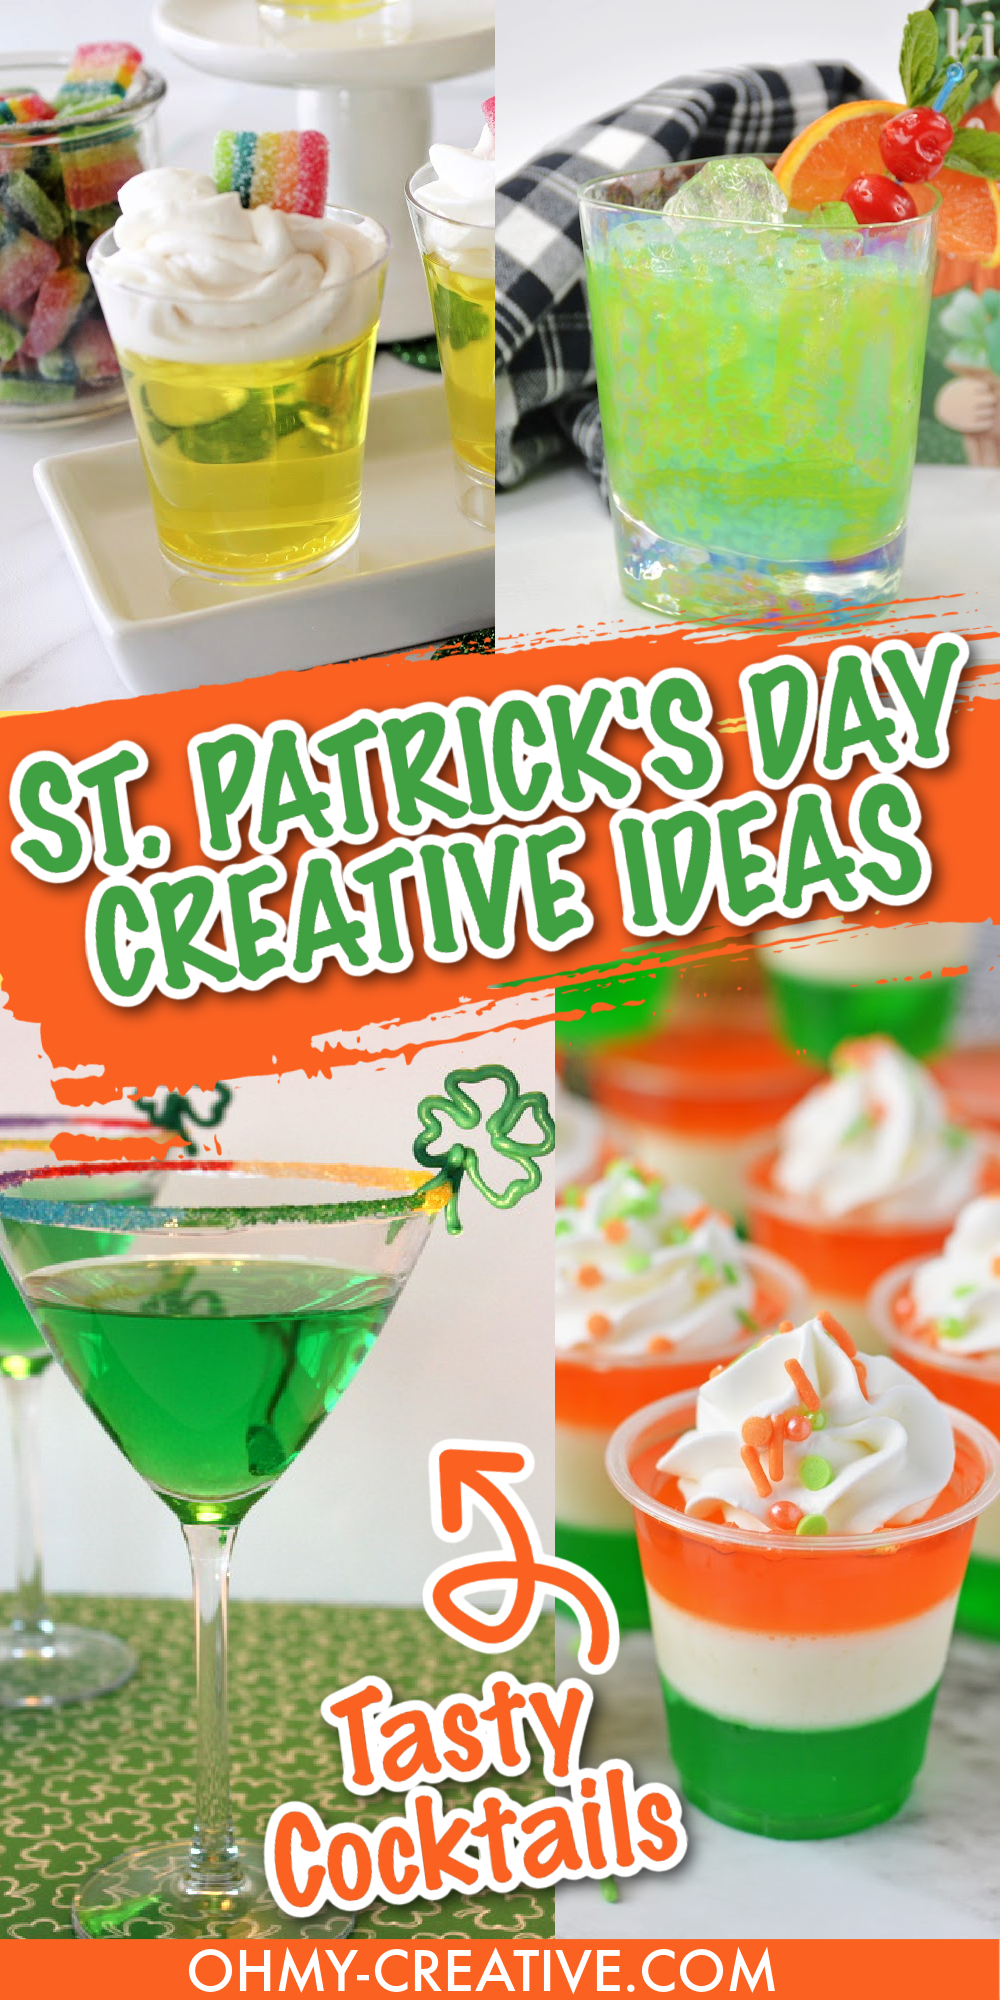 A pin image collage of St. Patrick's Day ideas including, cocktails, printables, crafts, & recipes to celebrate the holiday.